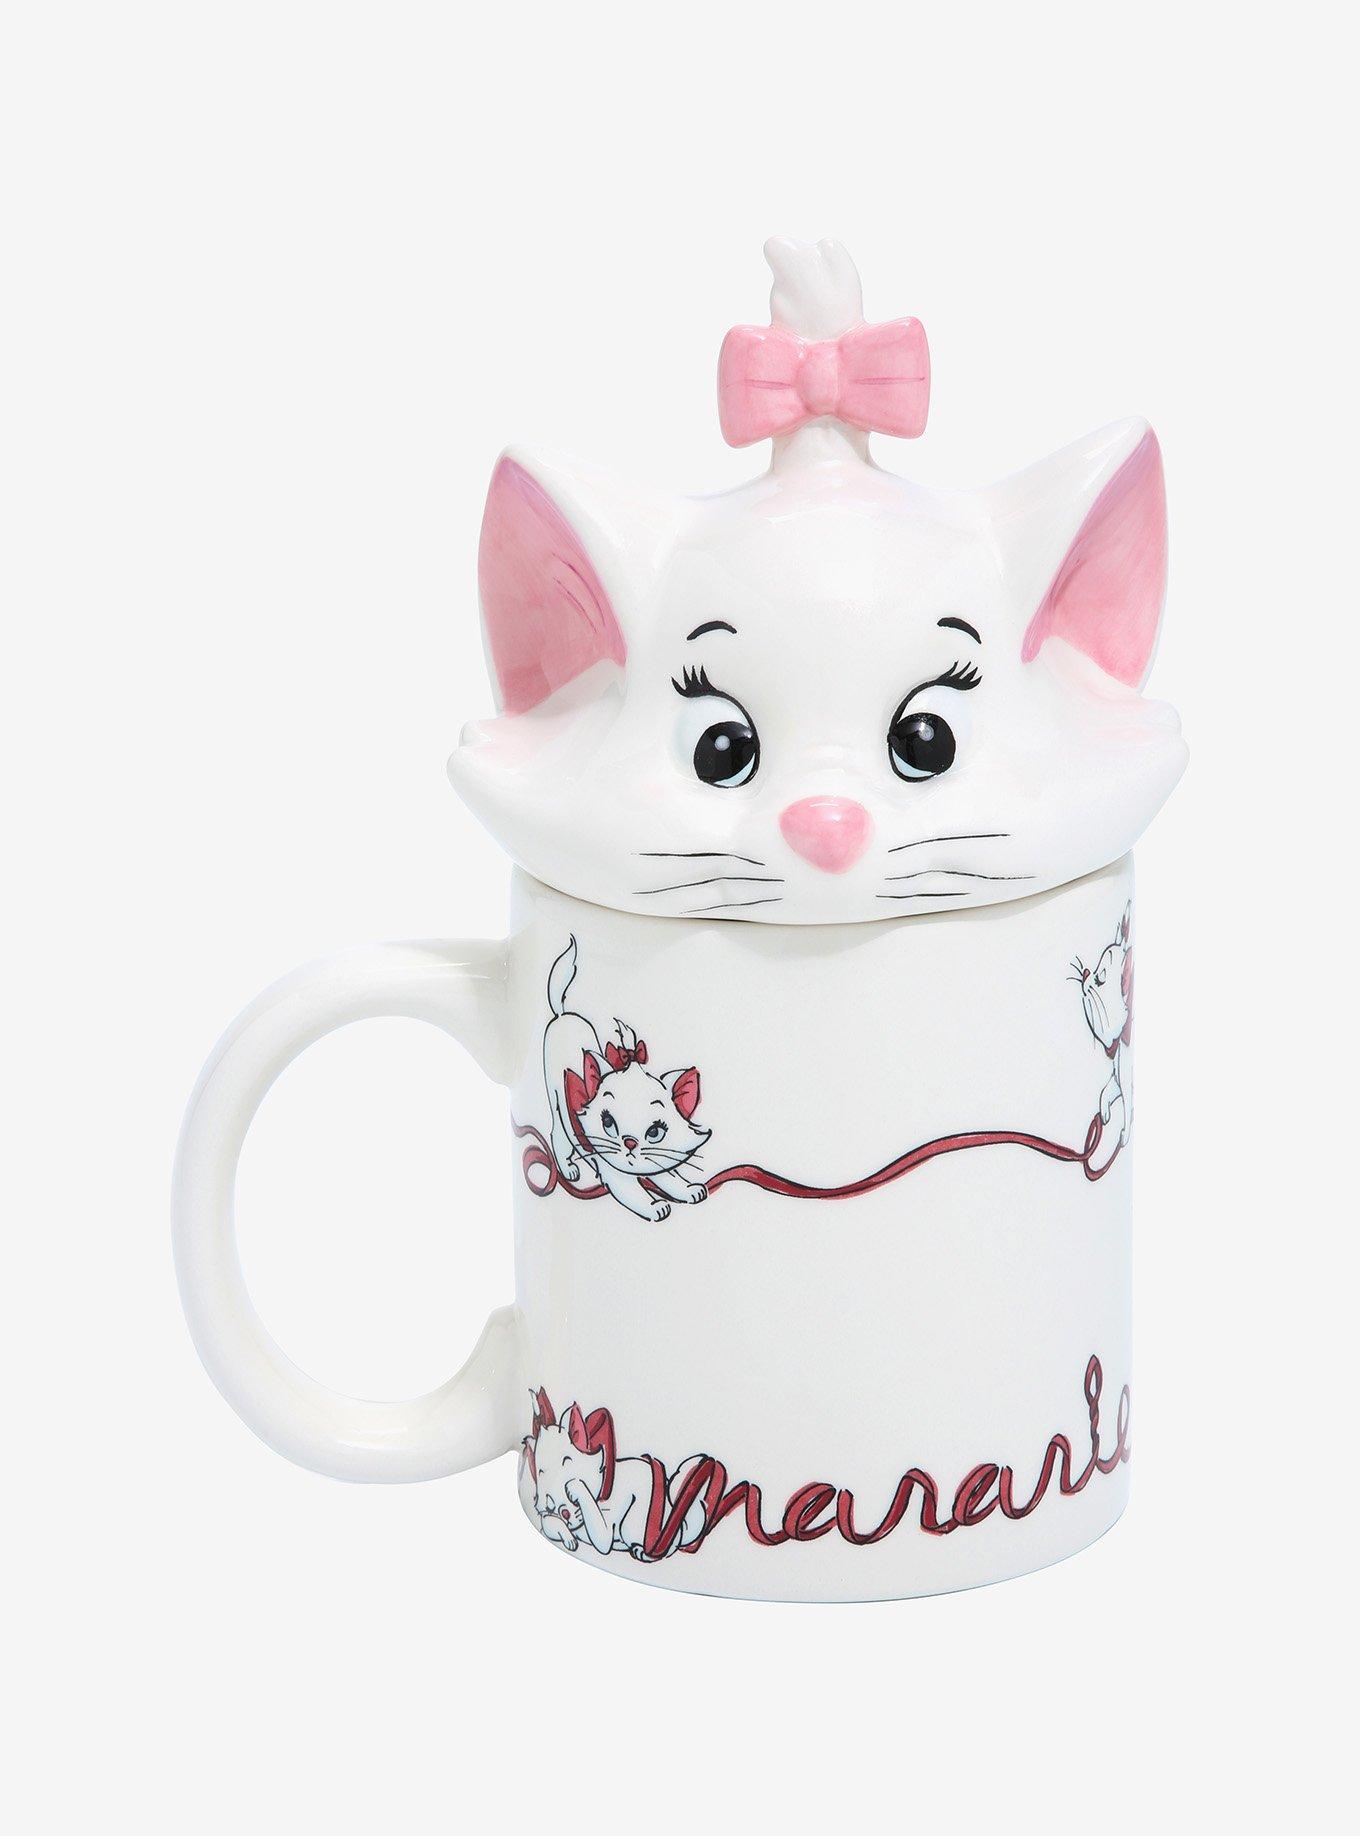 Aristocats Marie Snow Globe Sipper Cups